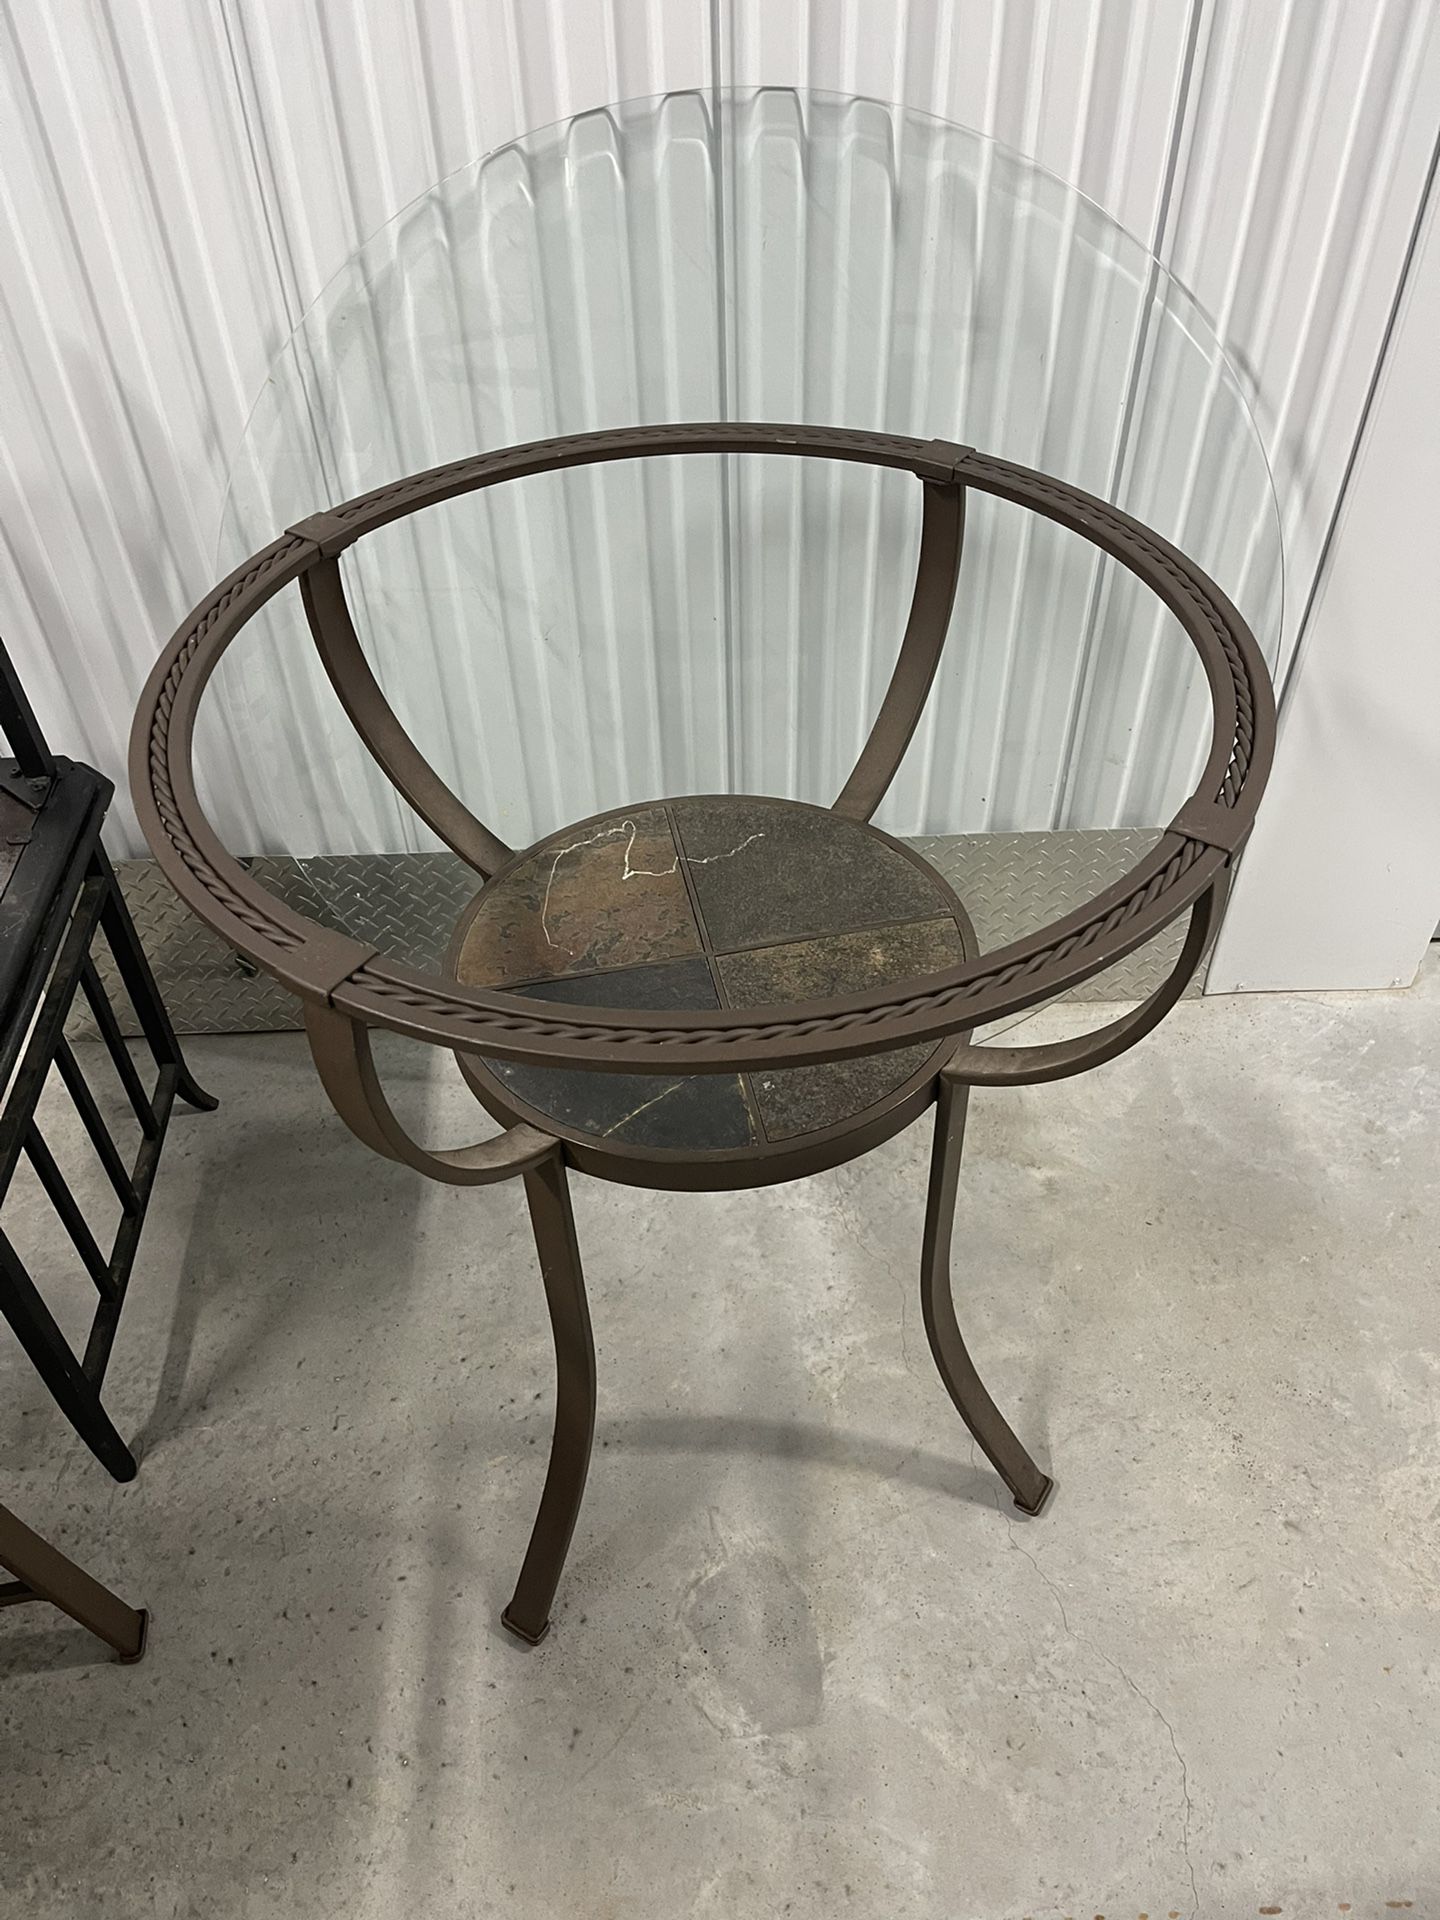 Glass Dining Table With Chairs 